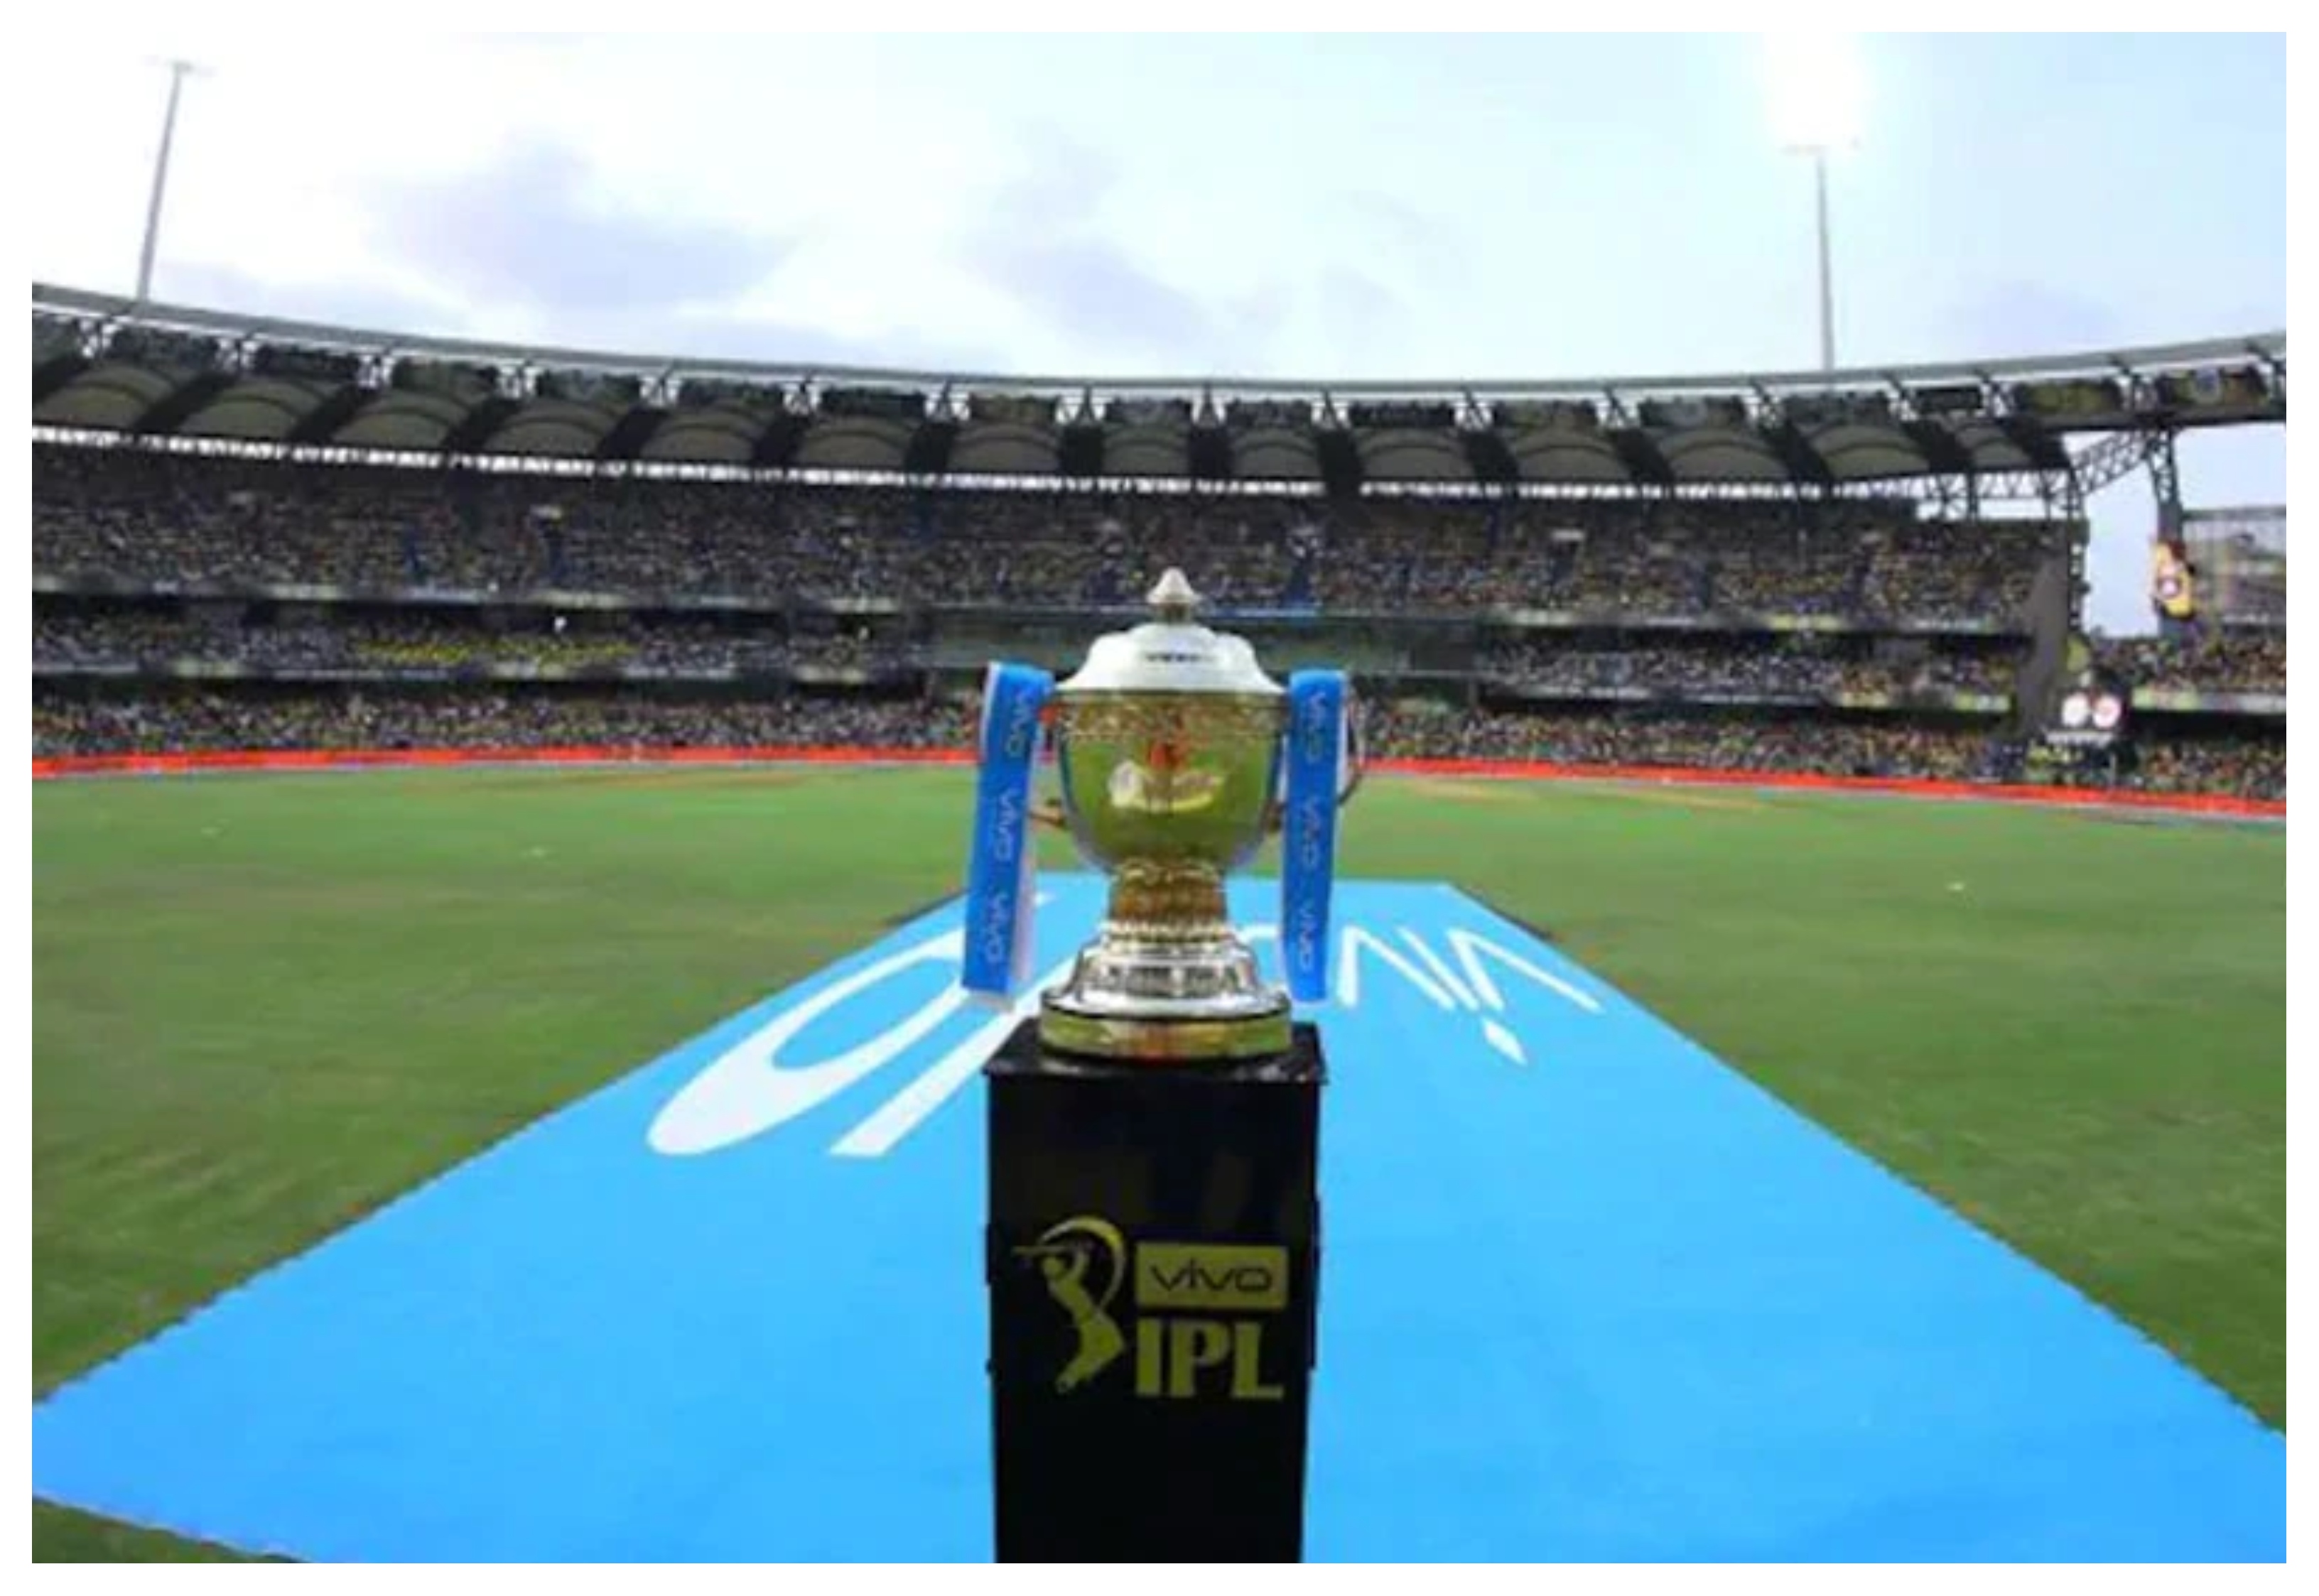 The IPL 2021 is due to begin on April 9 | BCCI/IPL